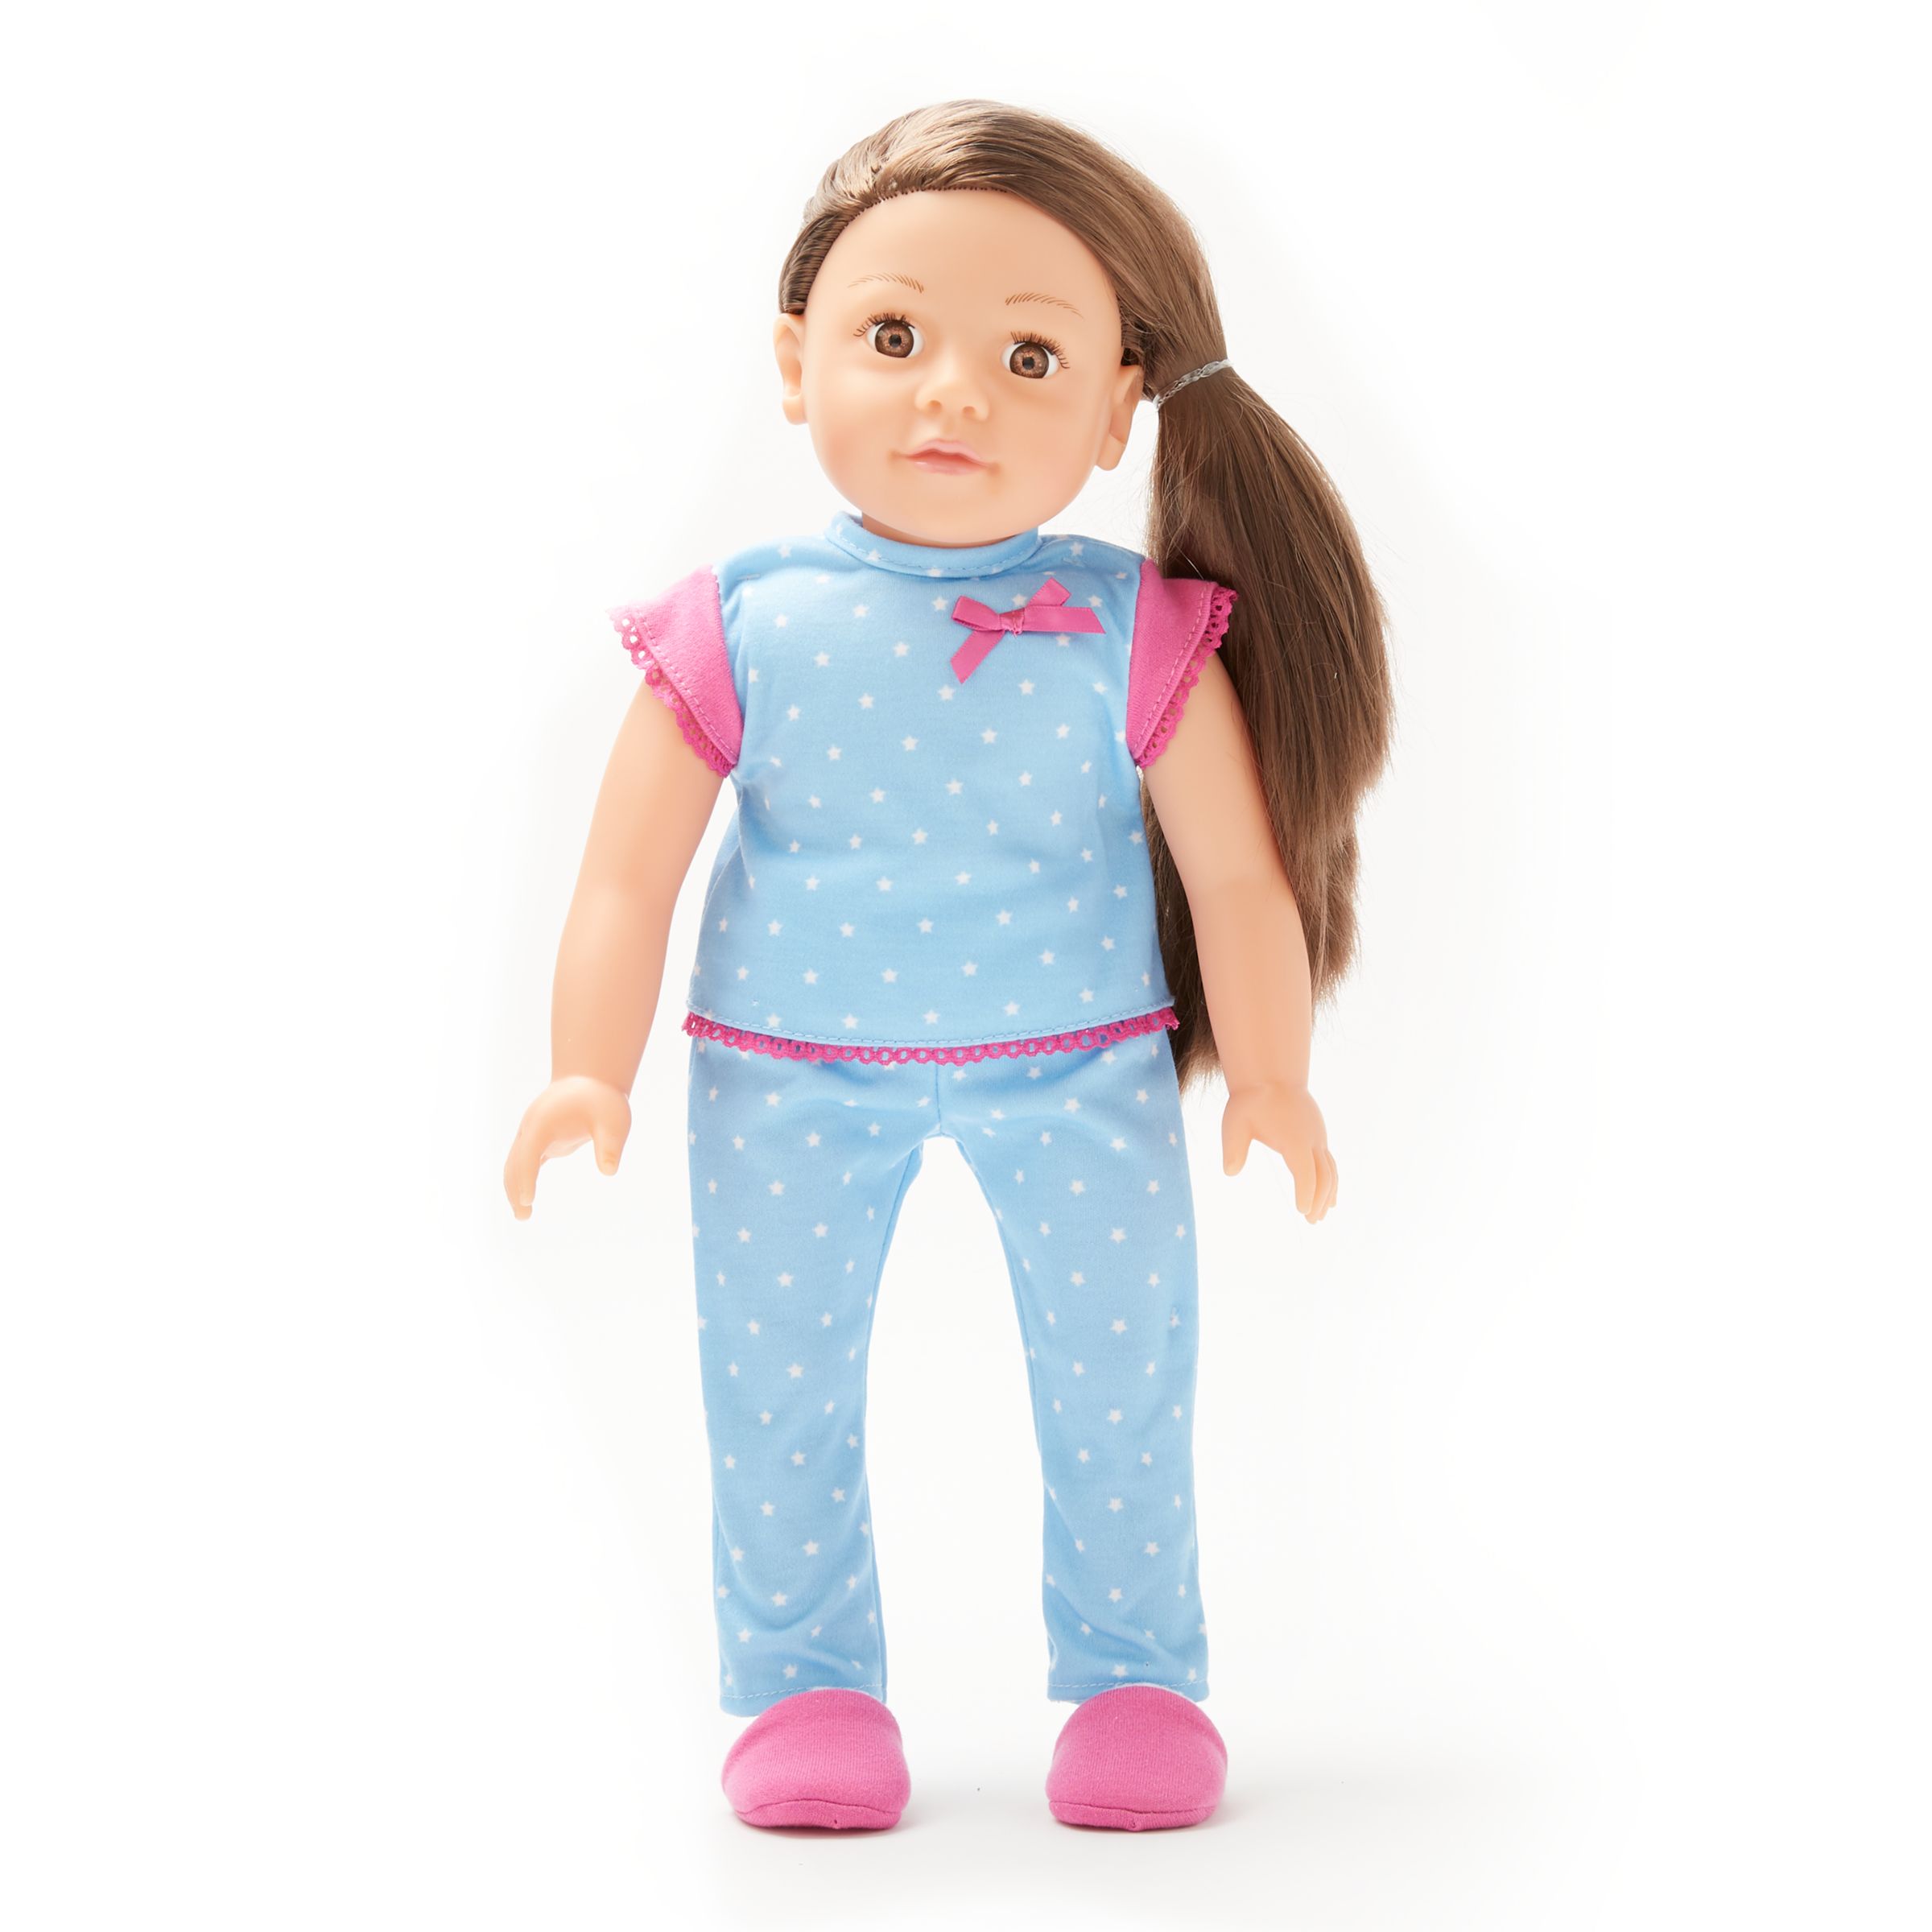 John Lewis & Partners Collector's Doll Bedtime Outfit